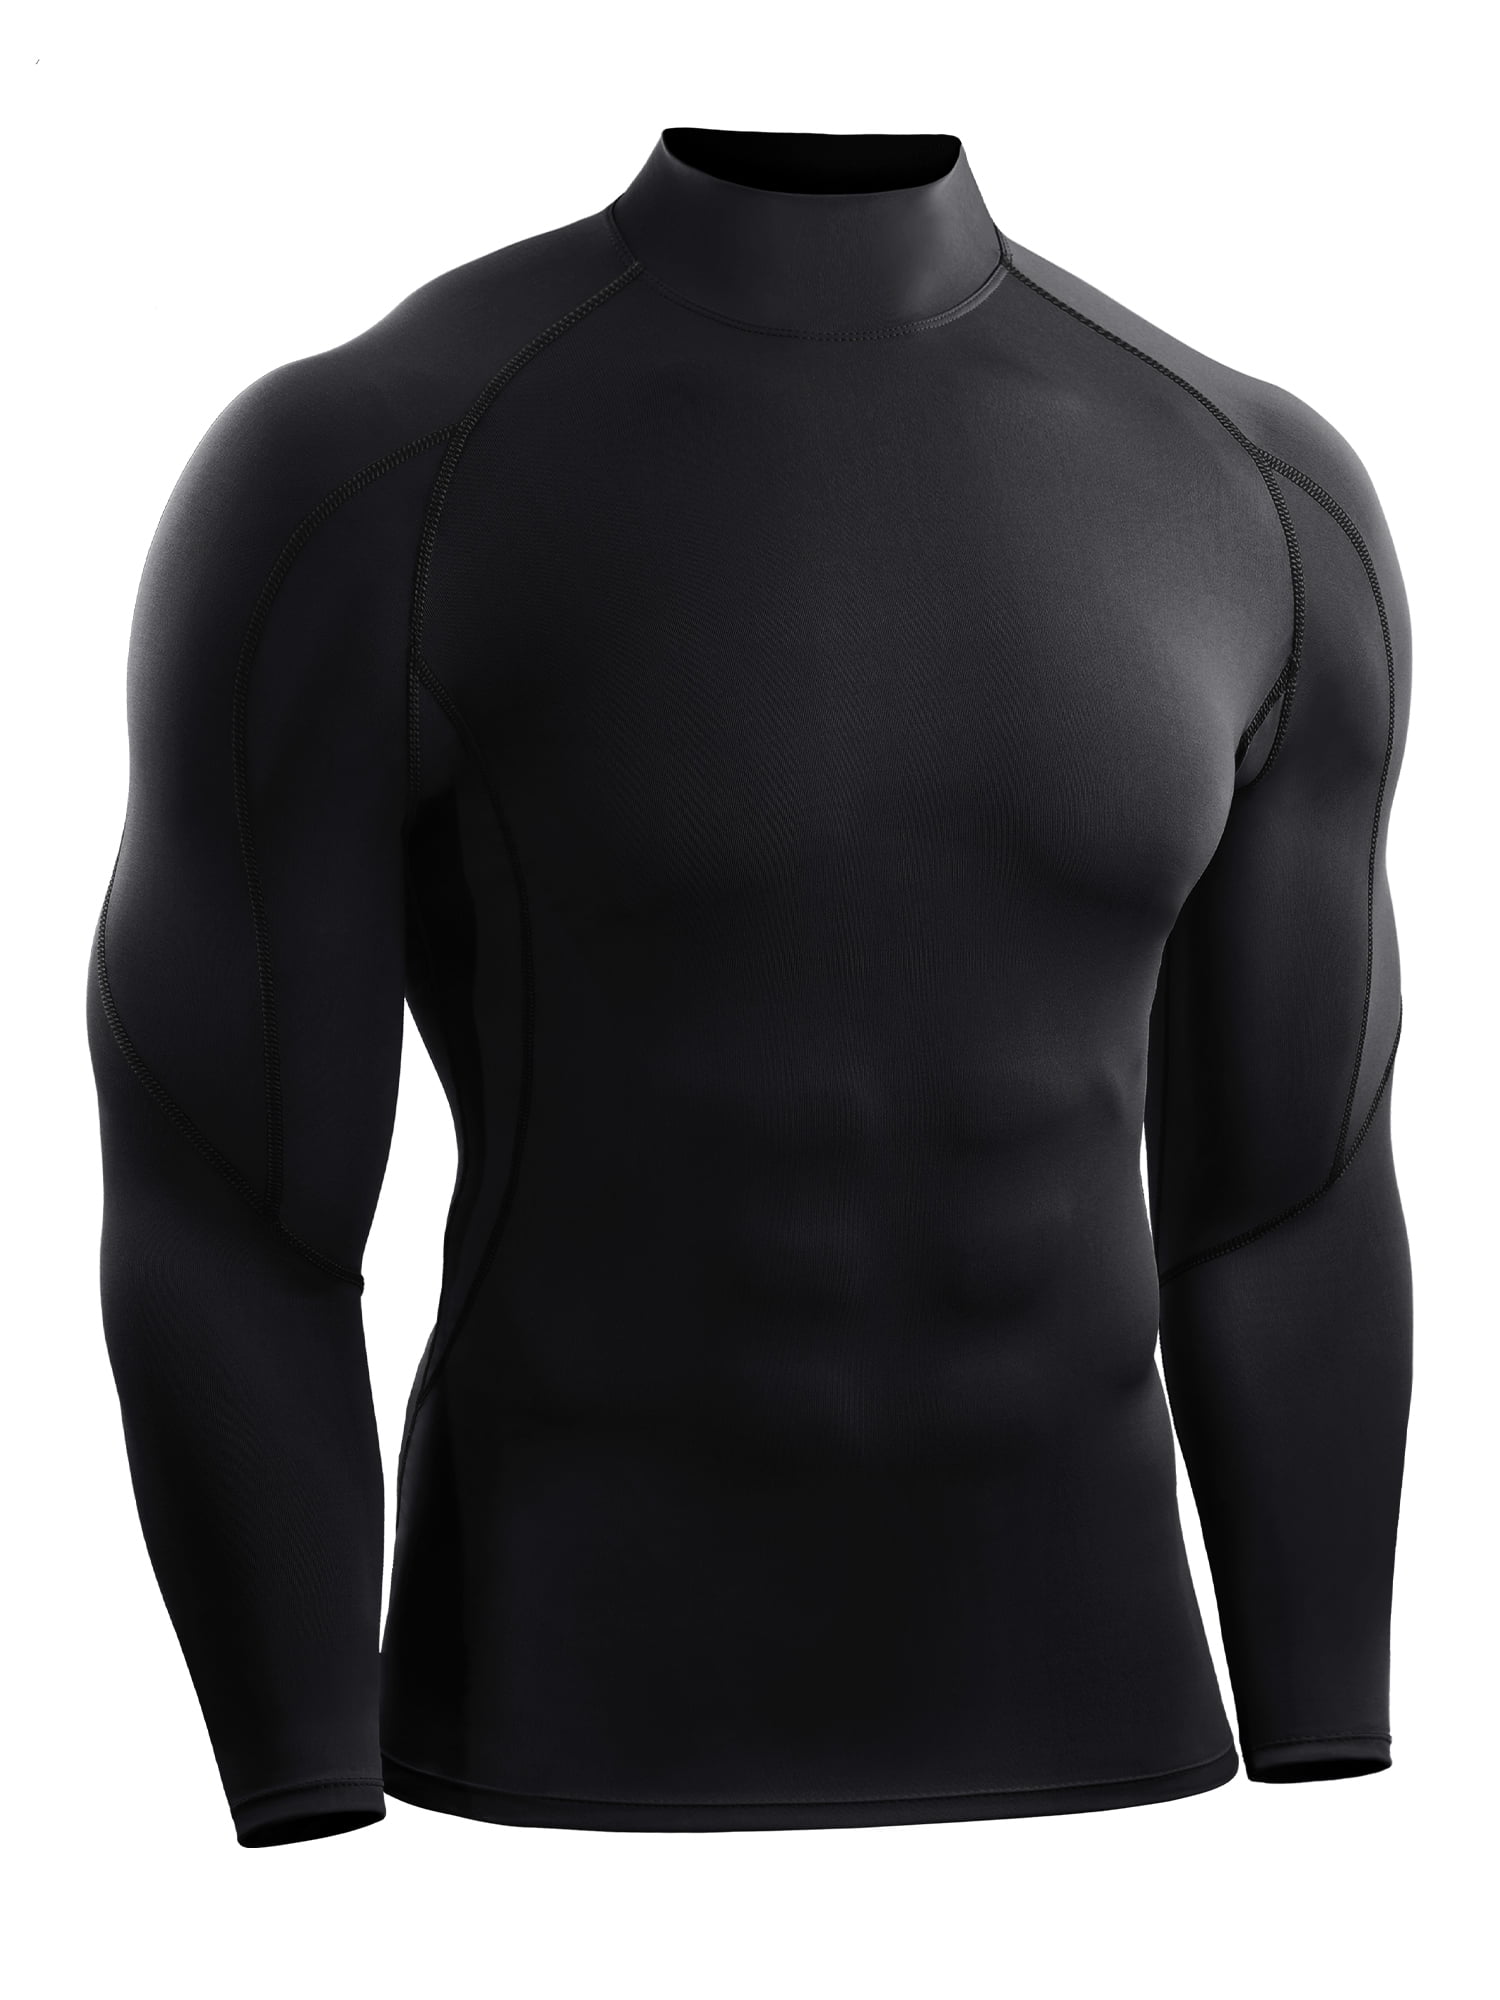 Medalist Thermo-Gear Men sz Lg Base Layer Thermal Shirt NEW Premier Turtle Neck 